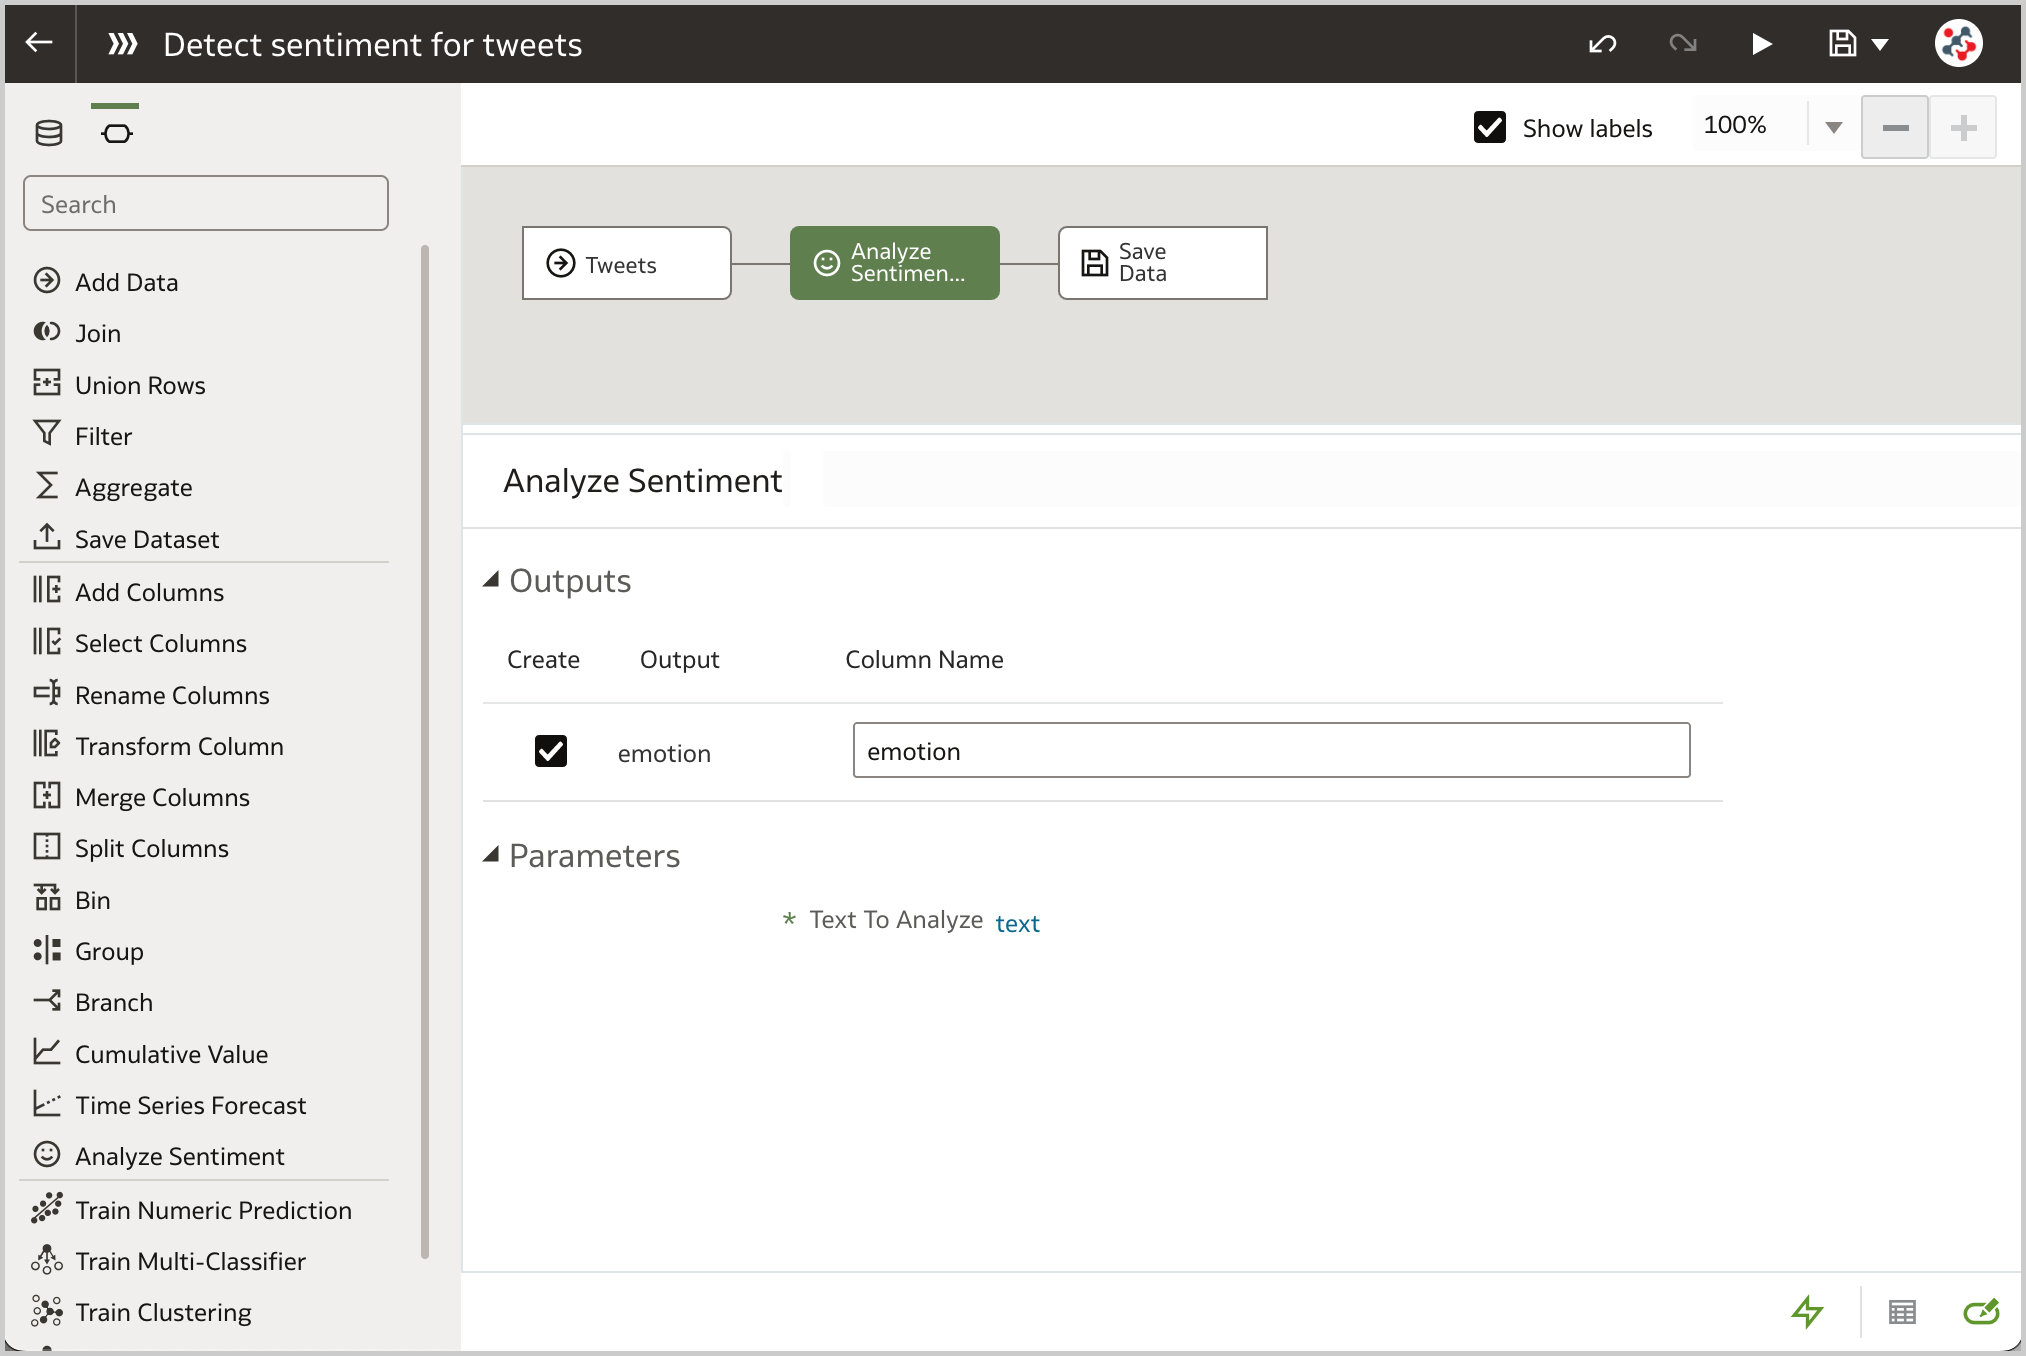 The Analyze Sentiment step allows to automatically detect the sentiment for a given textual column in a data flow.